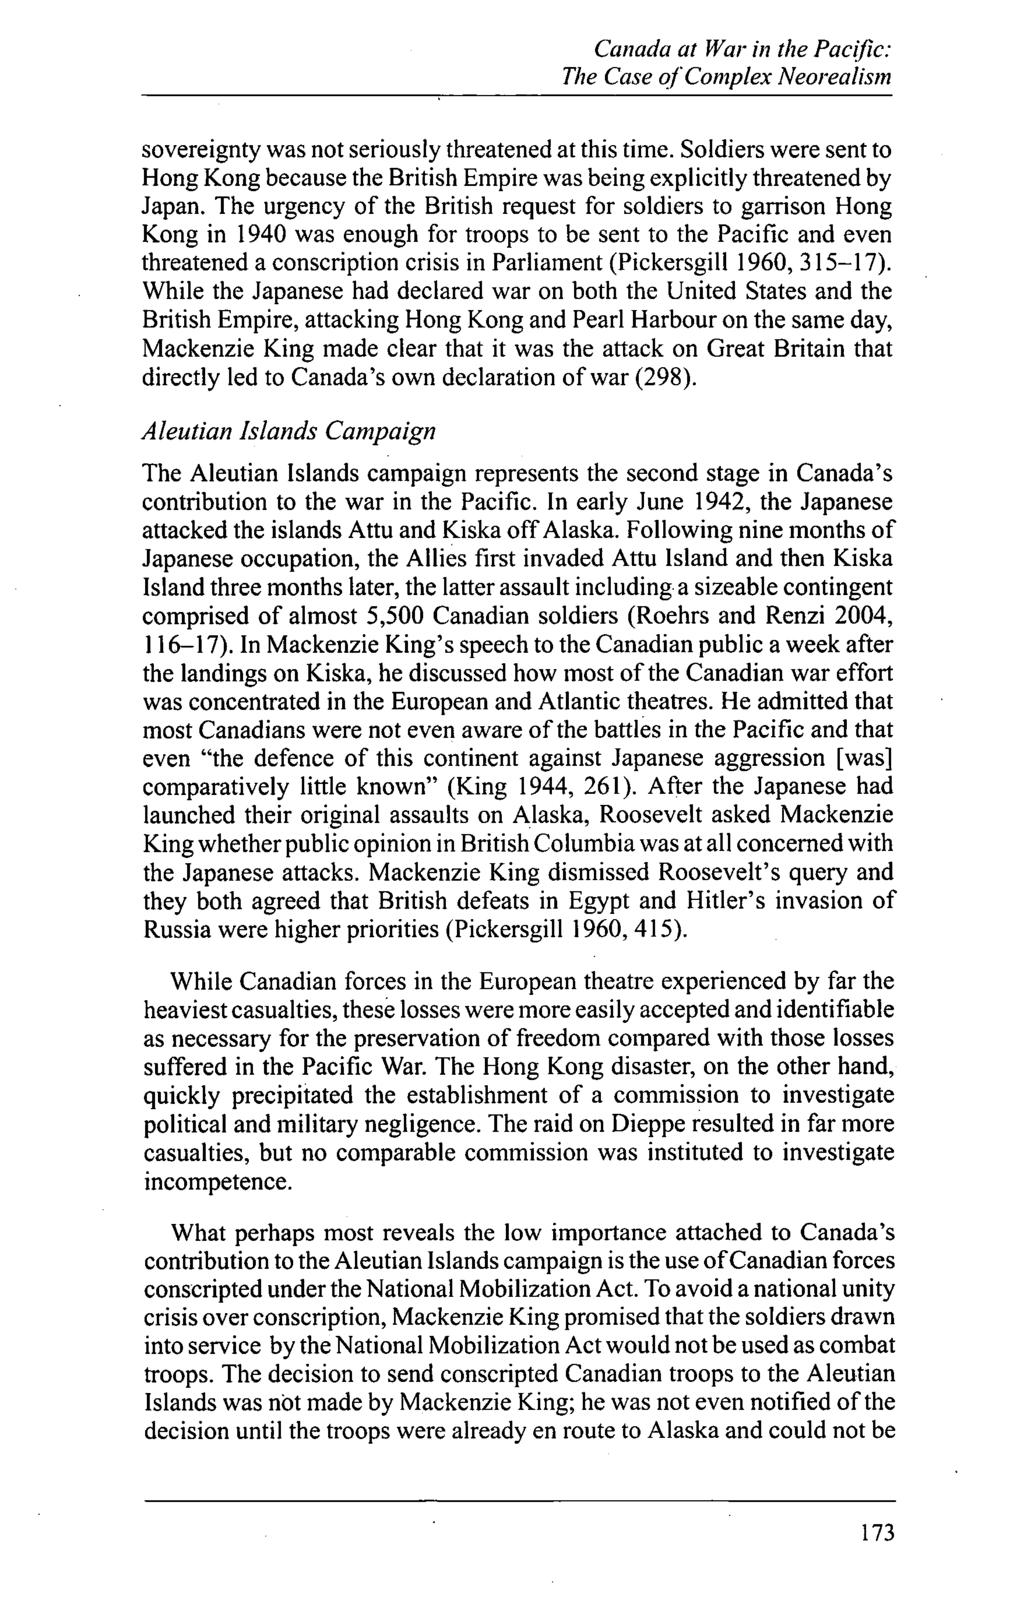 Canada at War in the Pacific: The Case of Complex Neorealism sovereignty was not seriously threatened at this time.